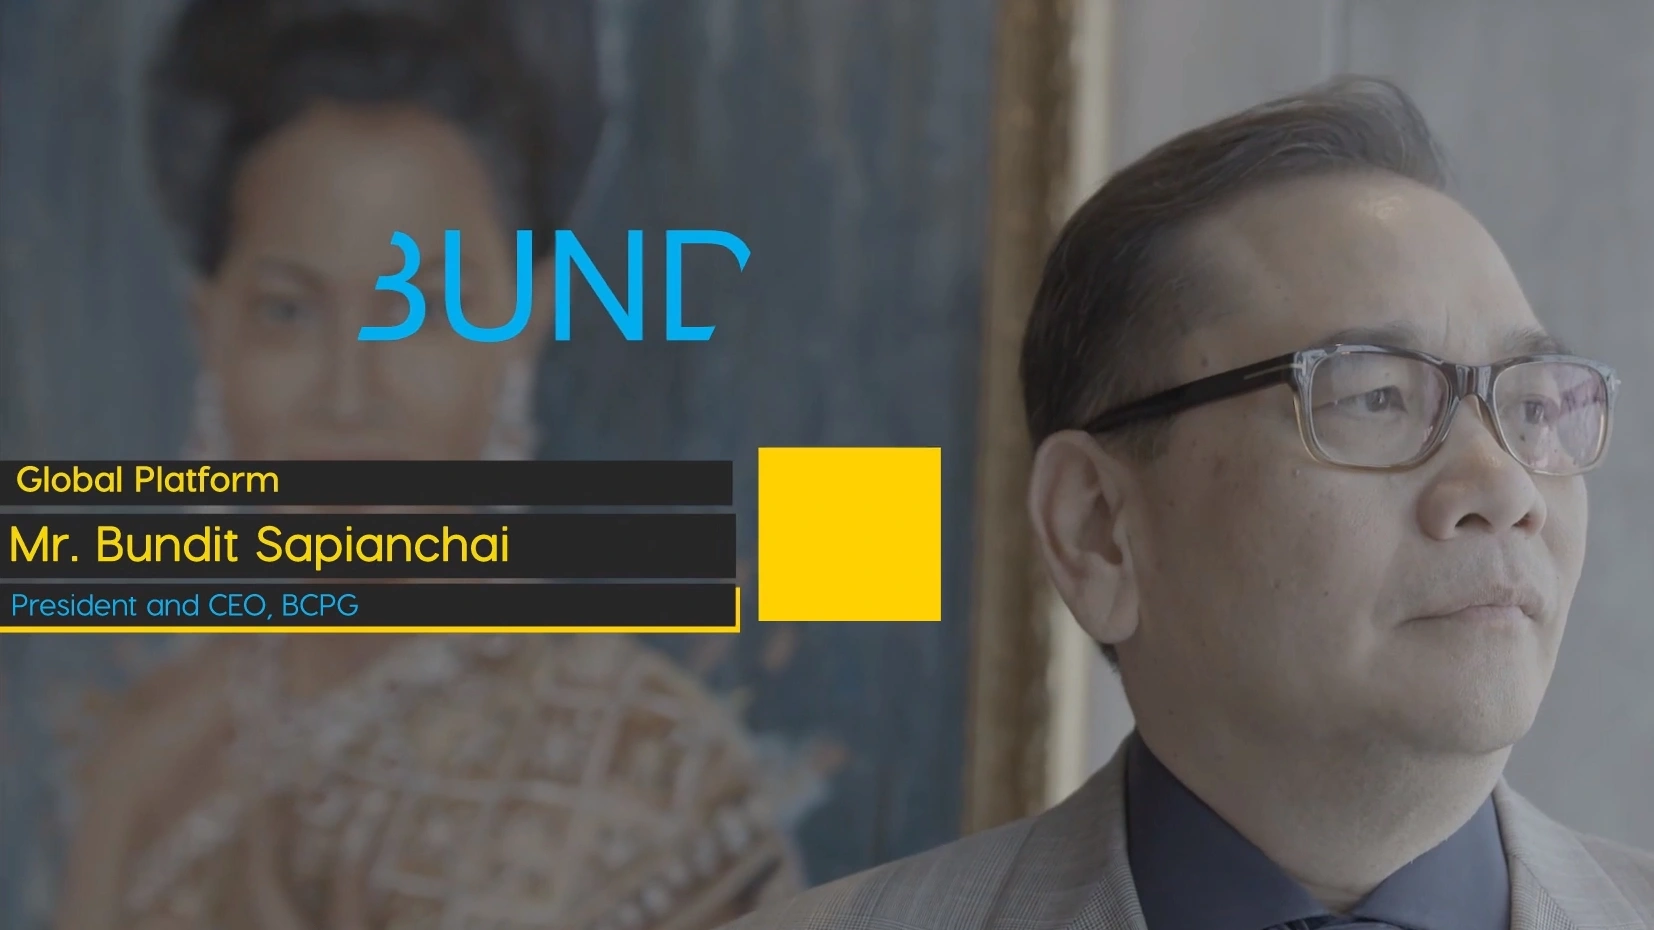 Oxford Business Group - BCPG with Mr. Bundit Sapiancha Corporate Video